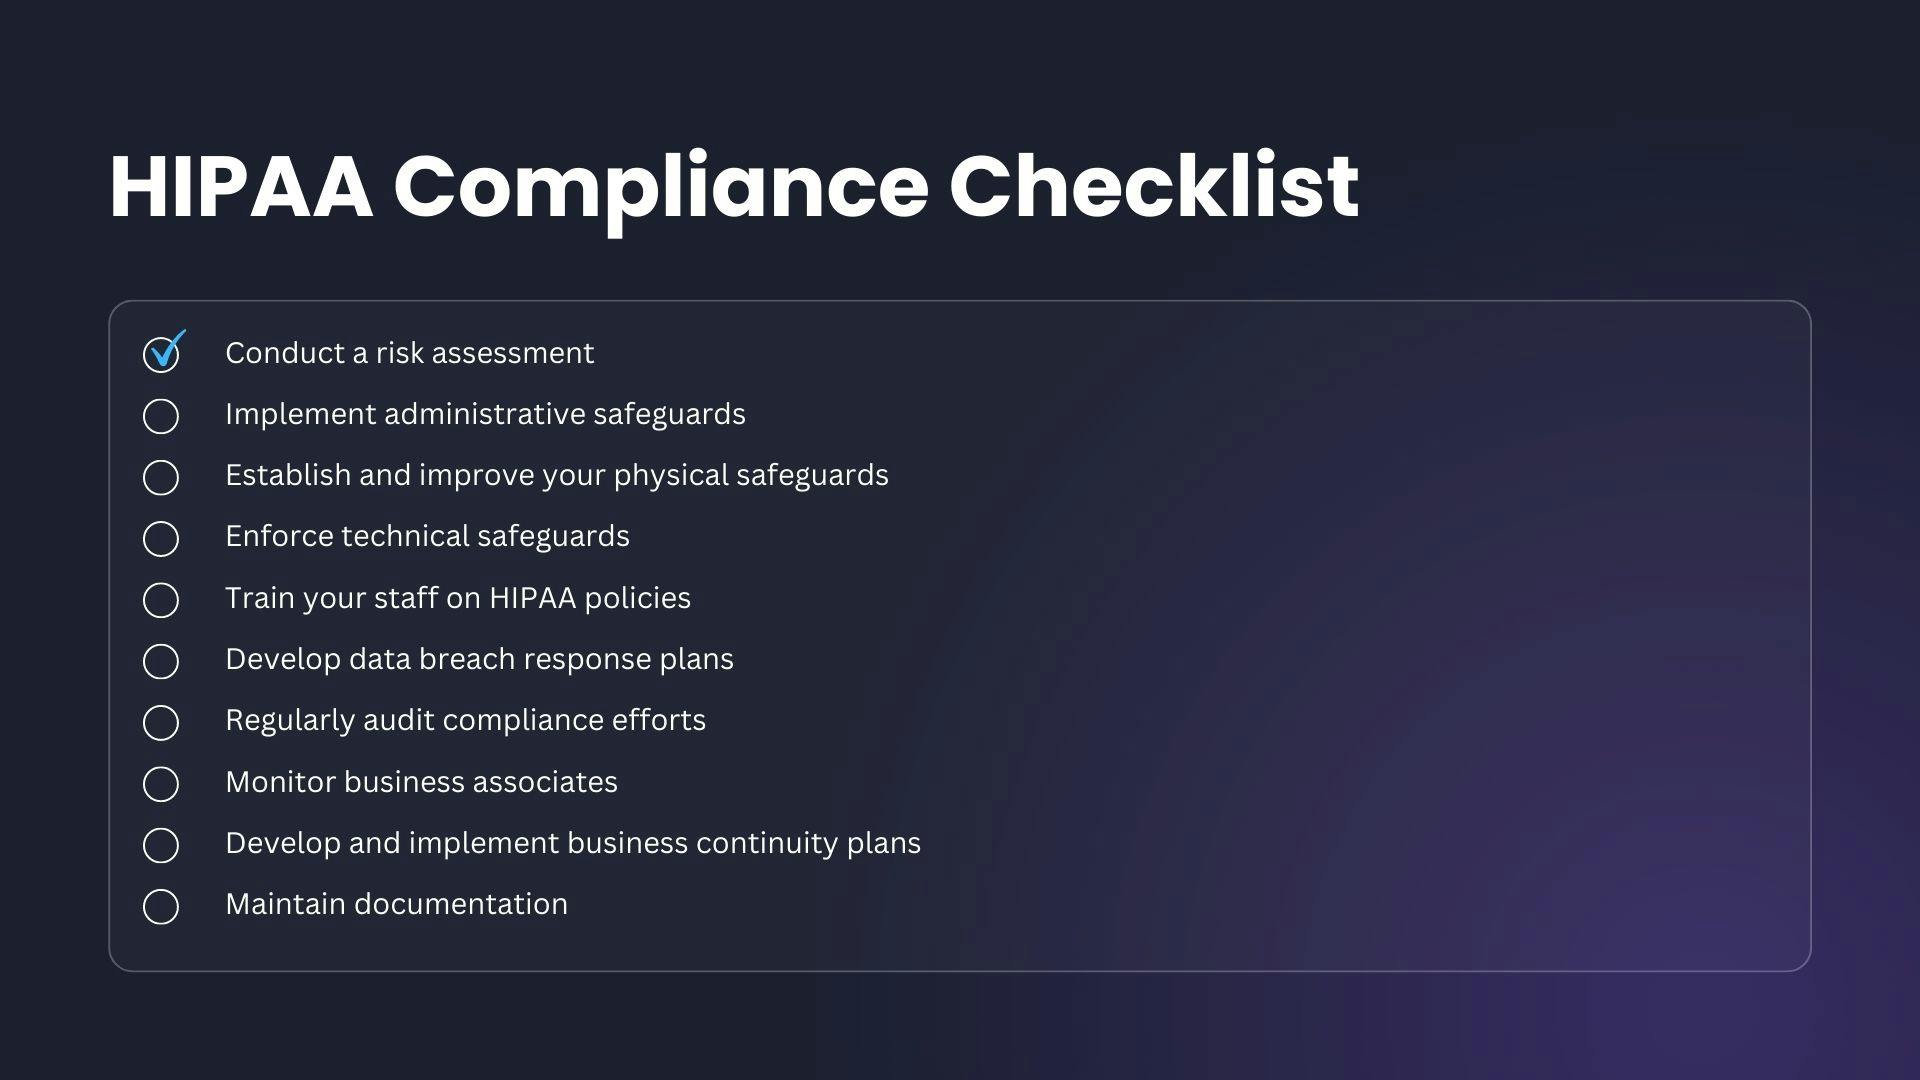 HIPAA Compliance Checklist - Overview